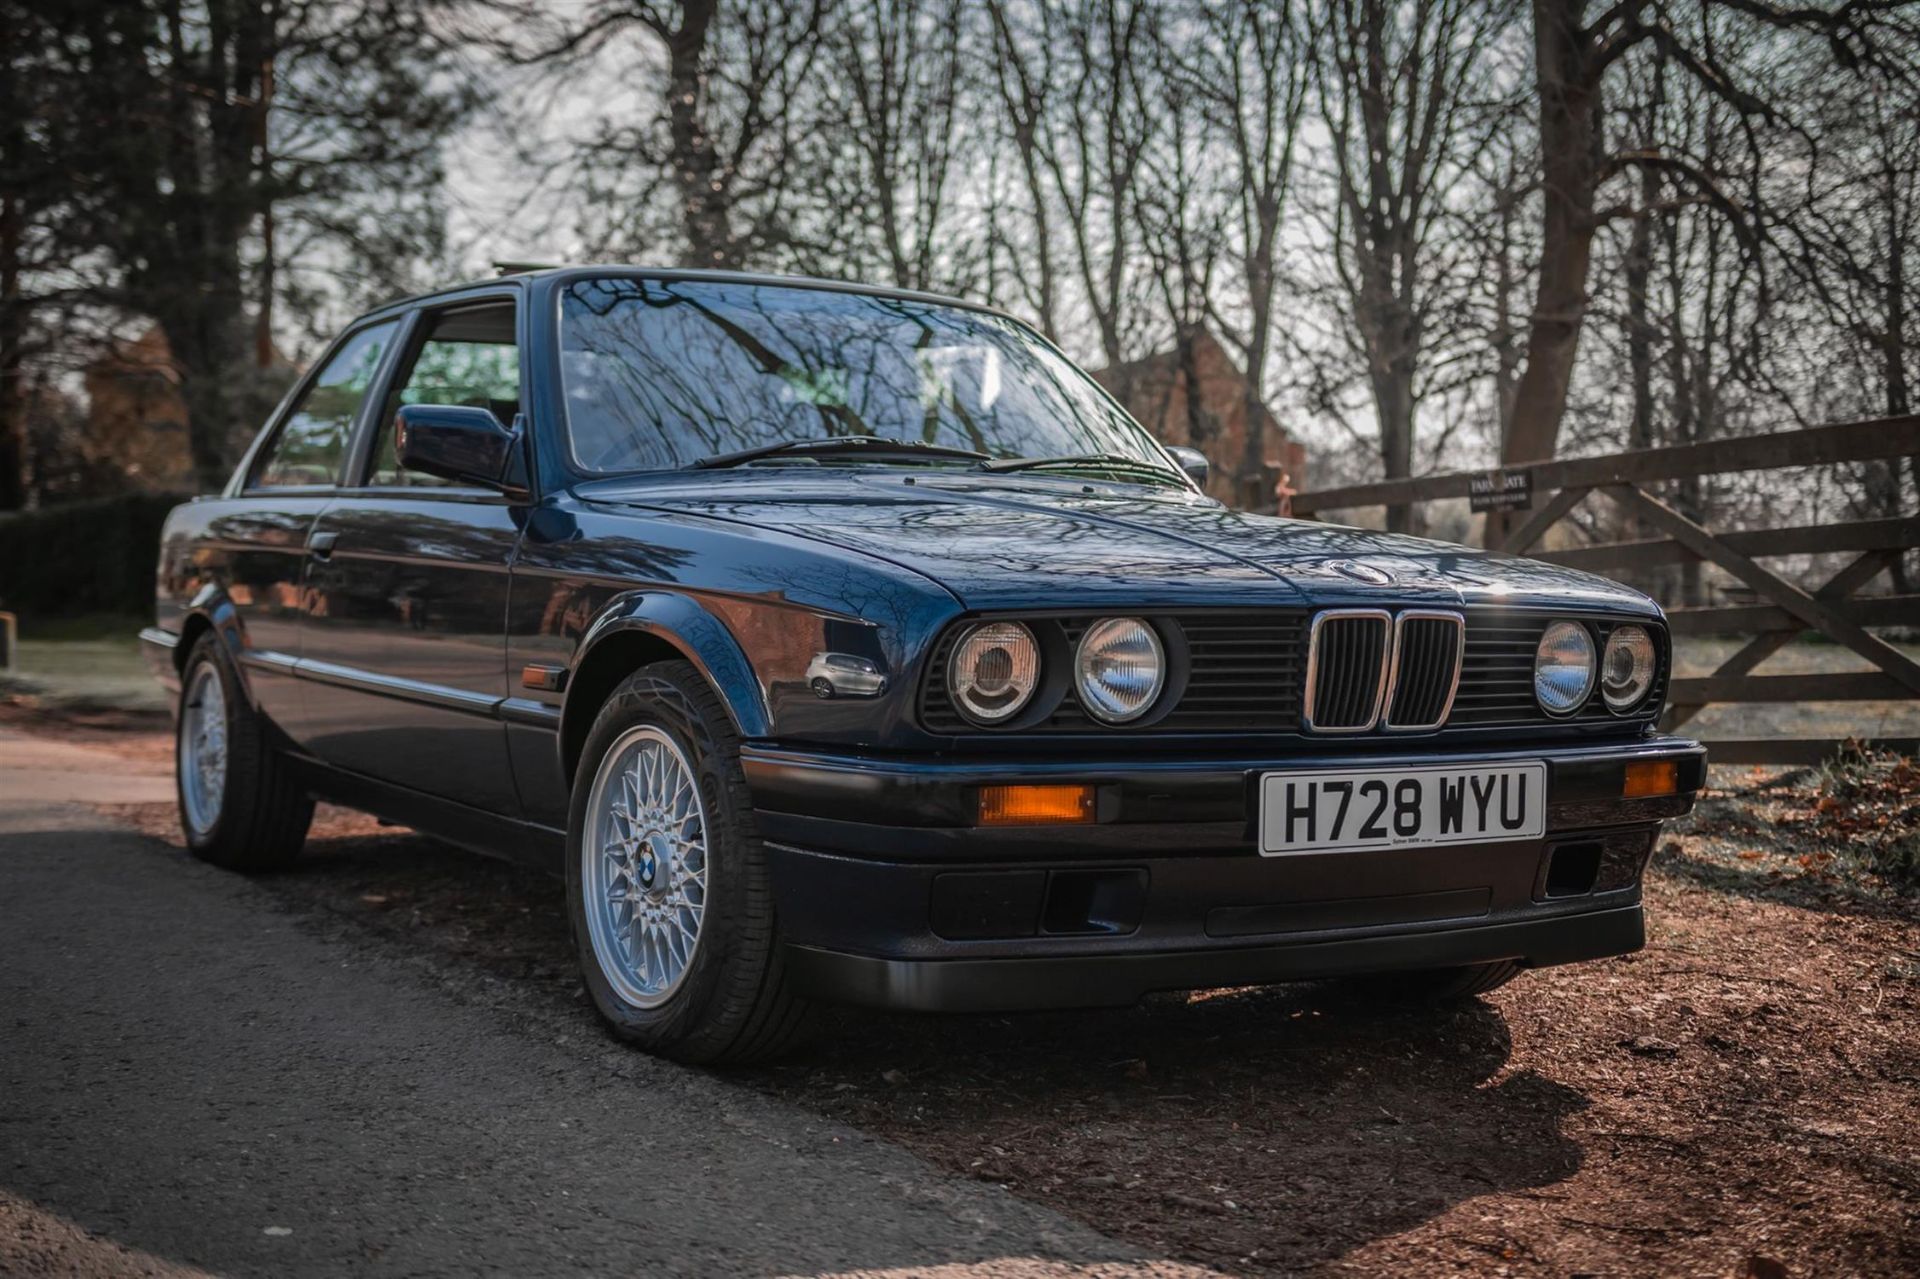 1990 BMW 318is Coupé (E30) - Image 7 of 10